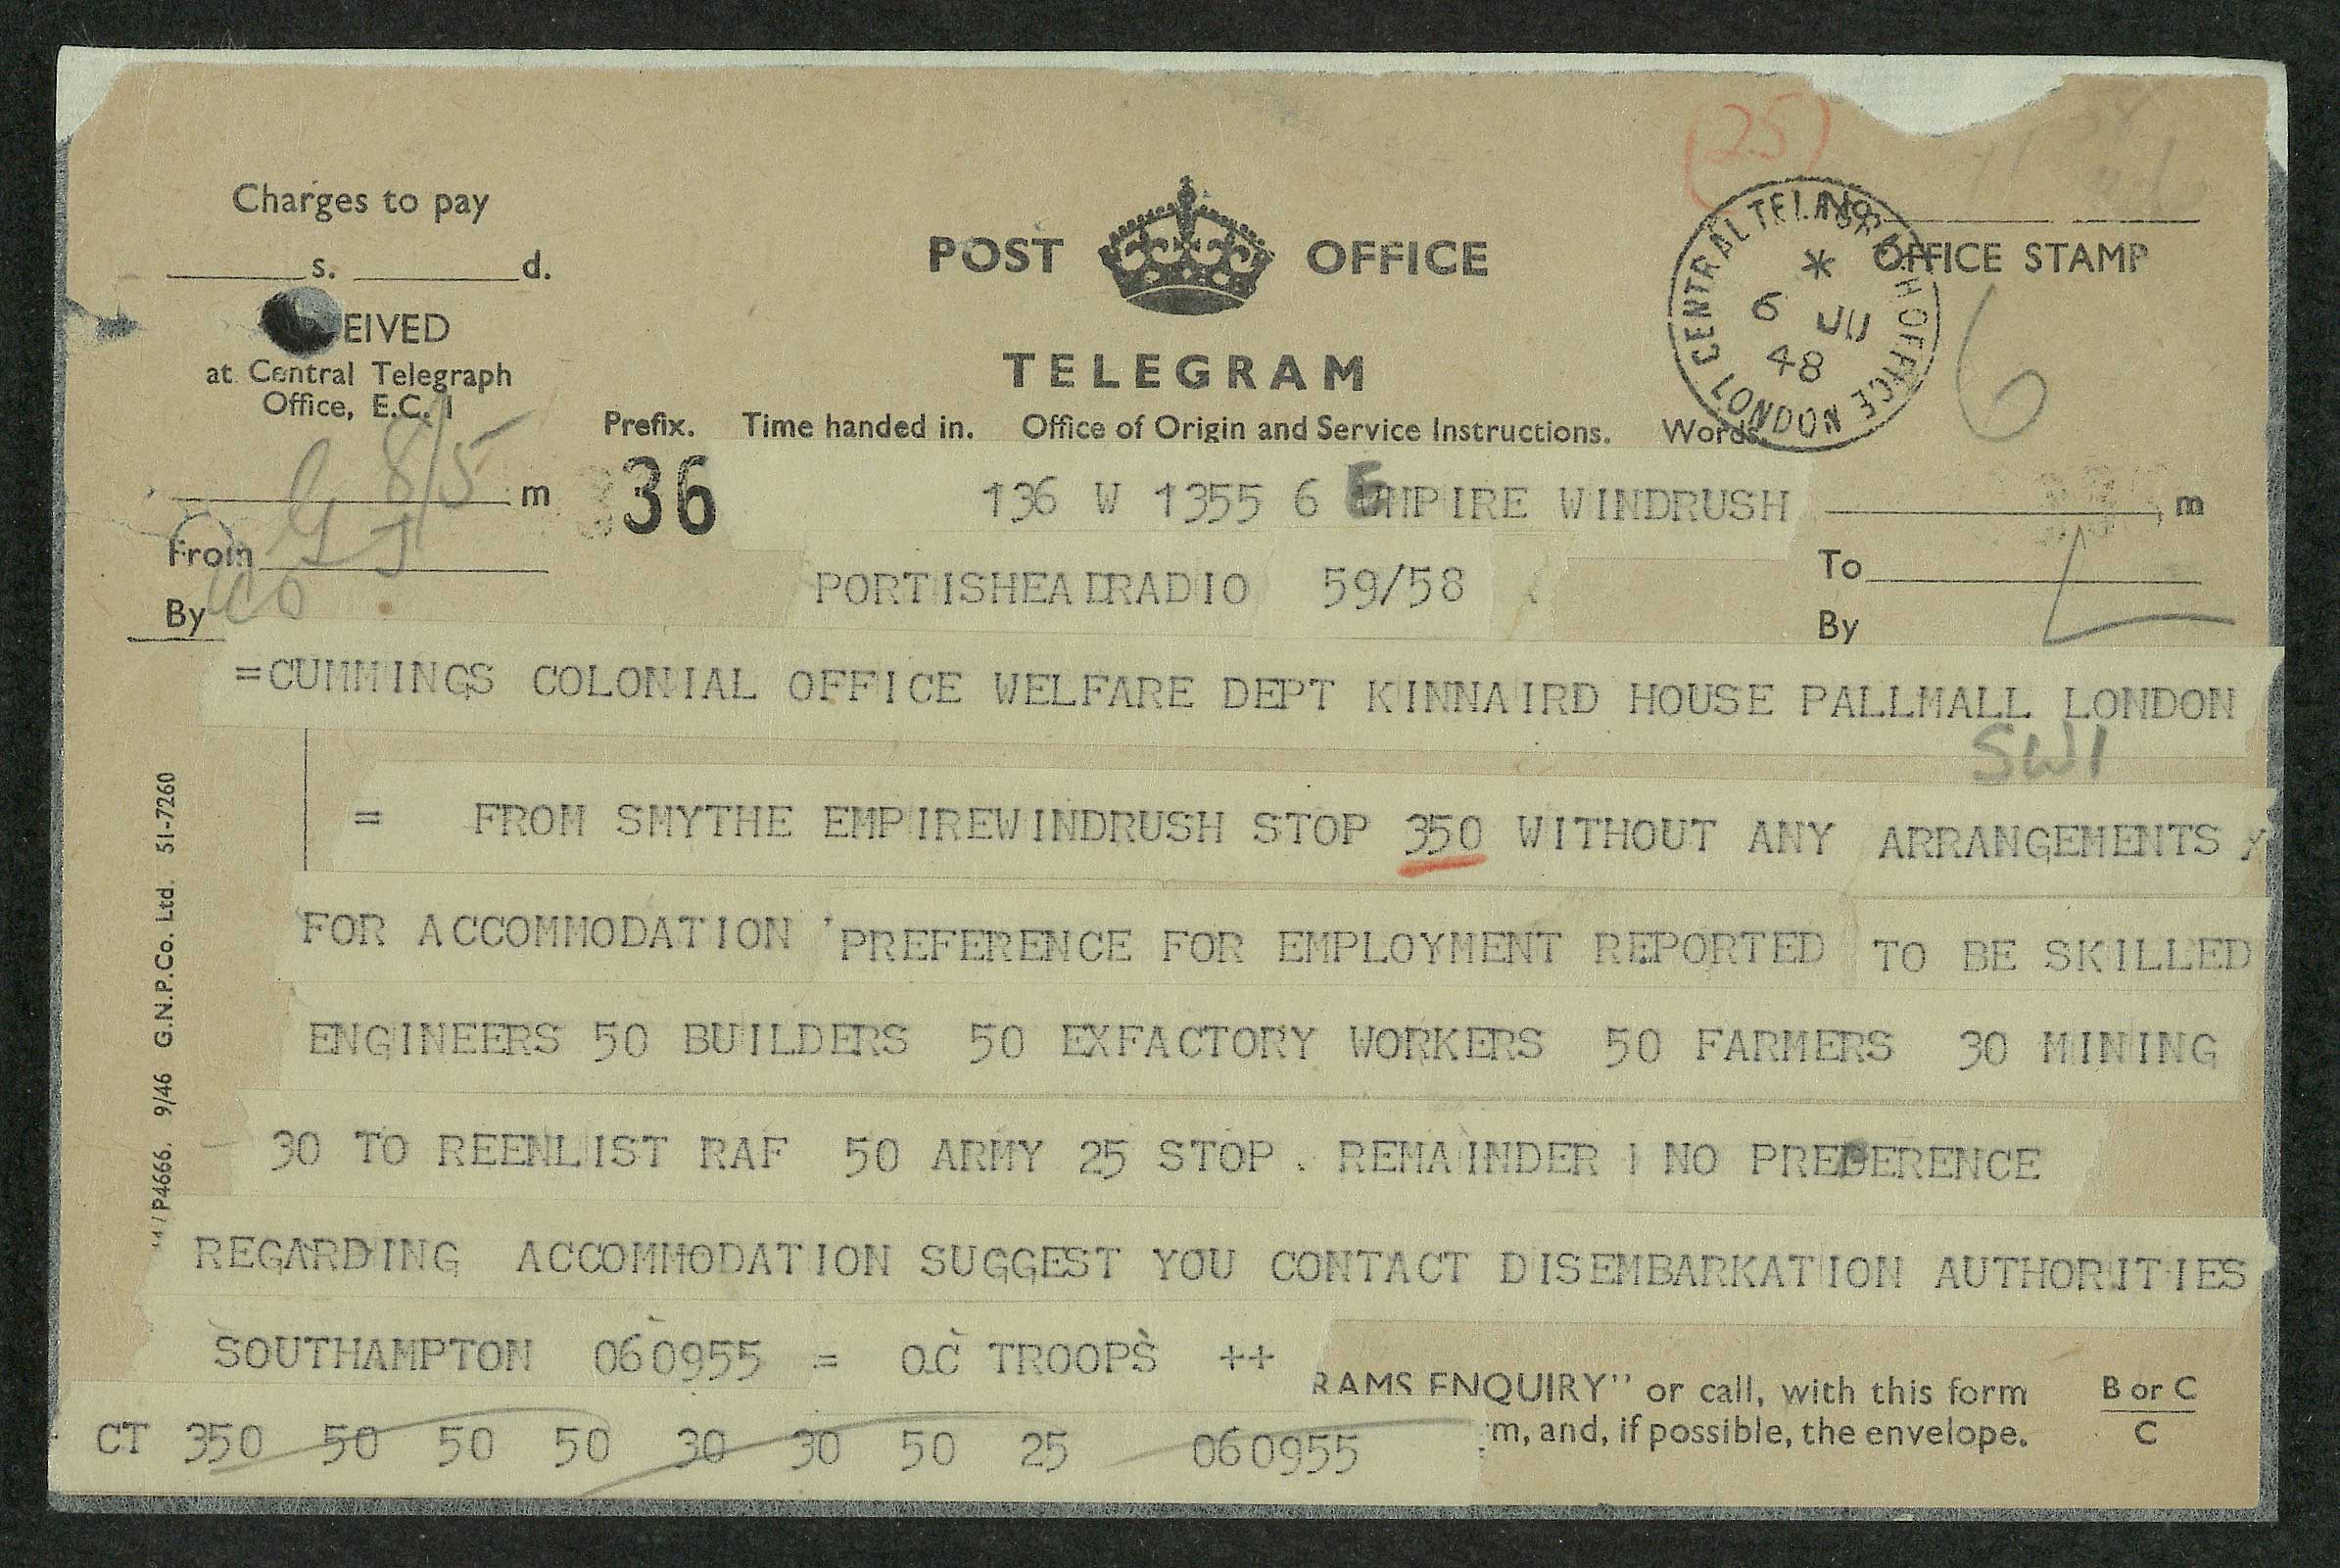 Source 1: Telegram to Mr Cummings - The National Archives